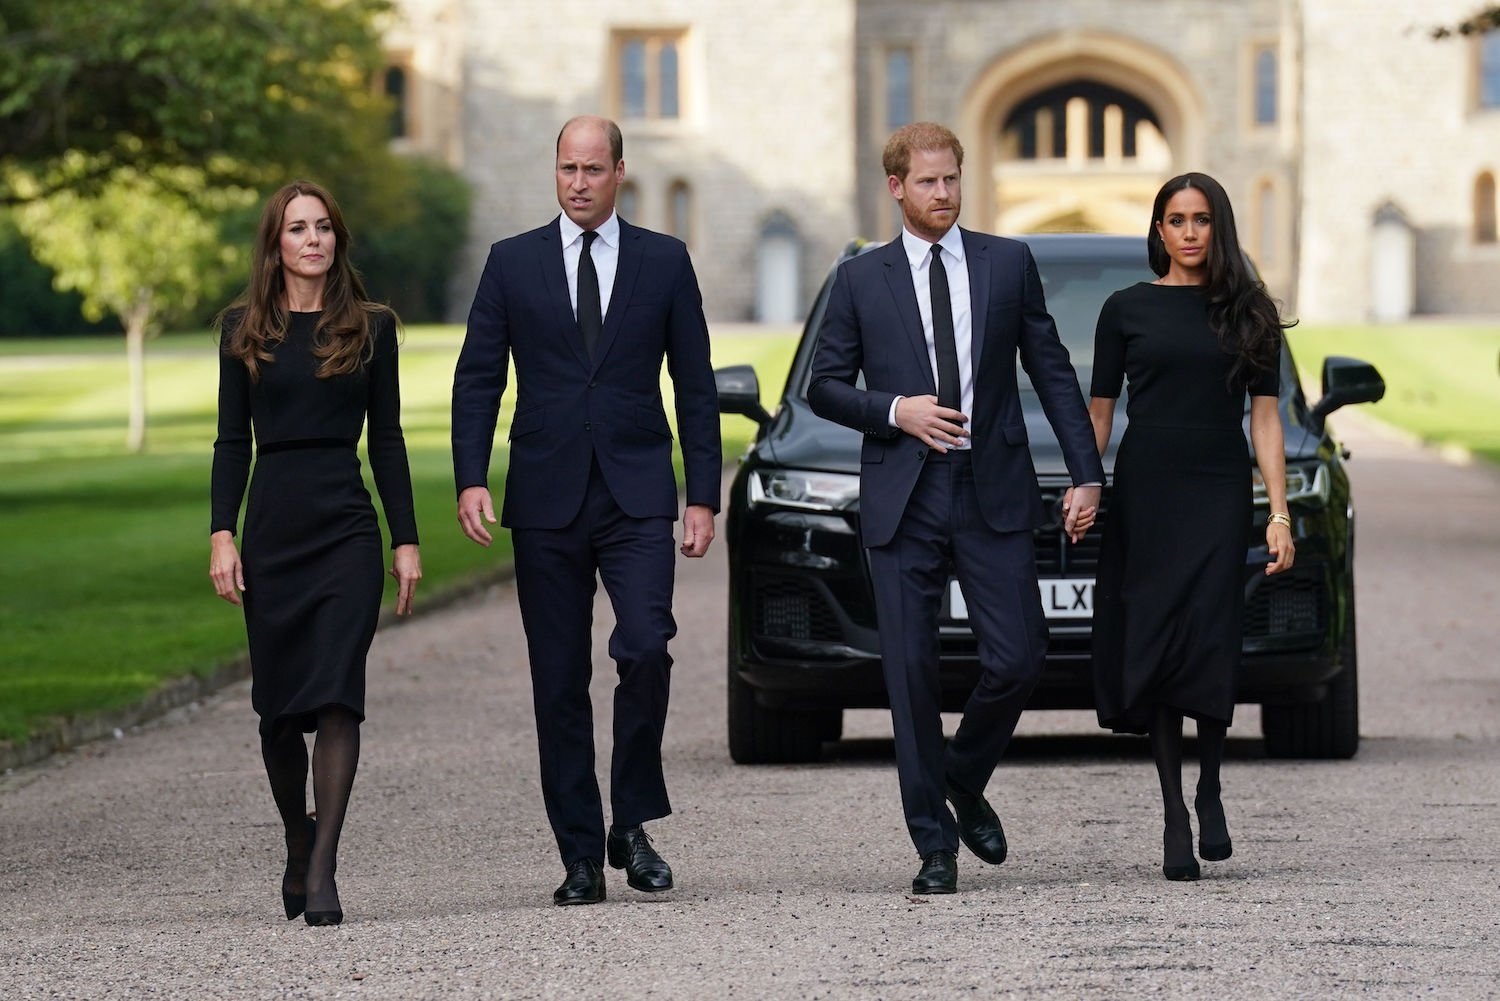 Prince William, Kate Middleton, Prince Harry, and Meghan Markle Appearance Didn’t Reveal Any Significant Bonding, Body Language Expert Says